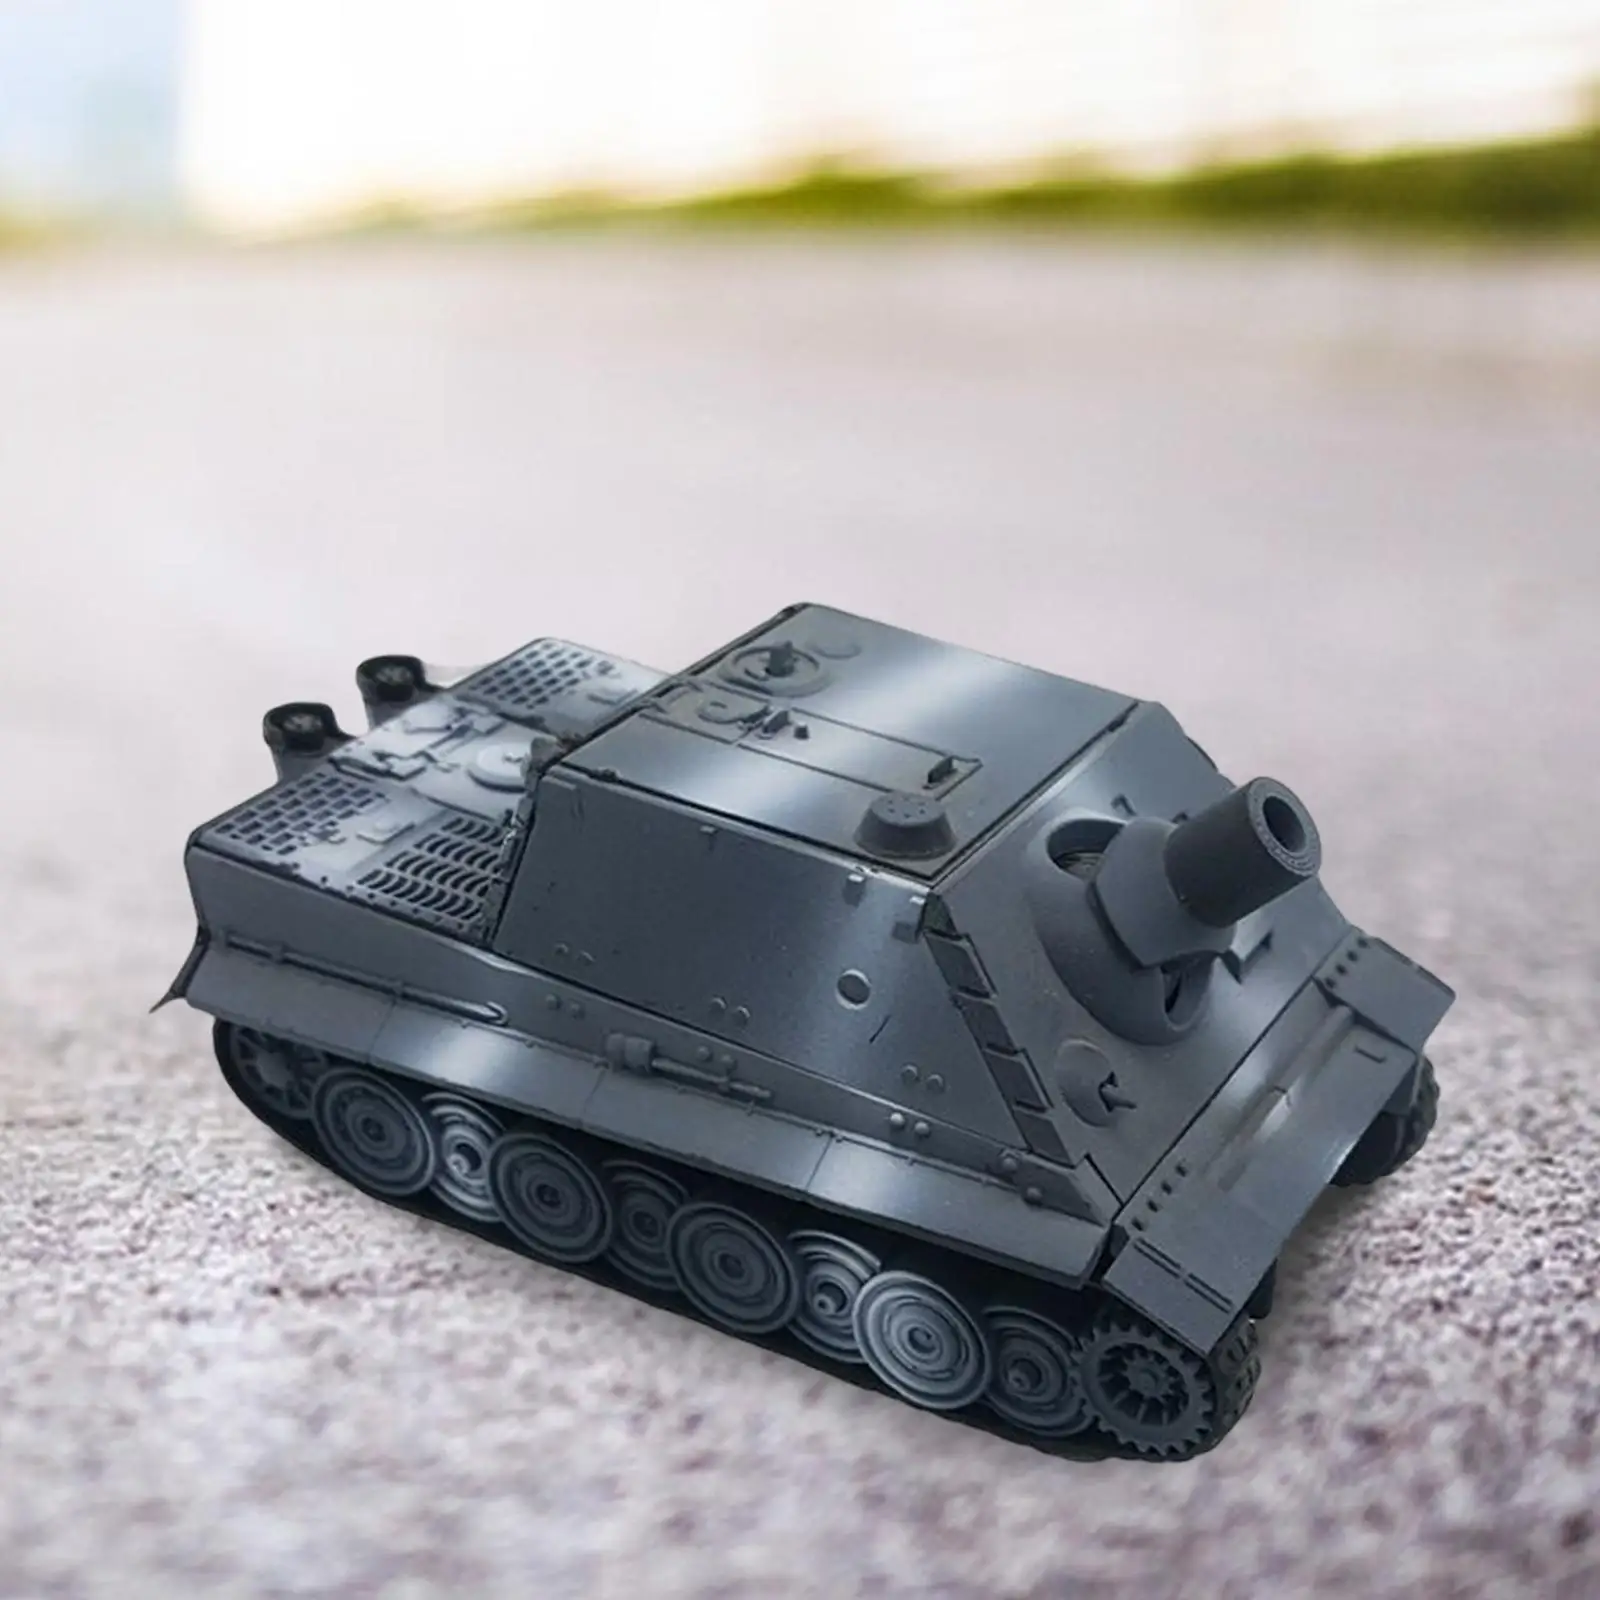 1/72 Scale 4D Assemble Tank Kits Educational Toy for Hotel Holiday Decor